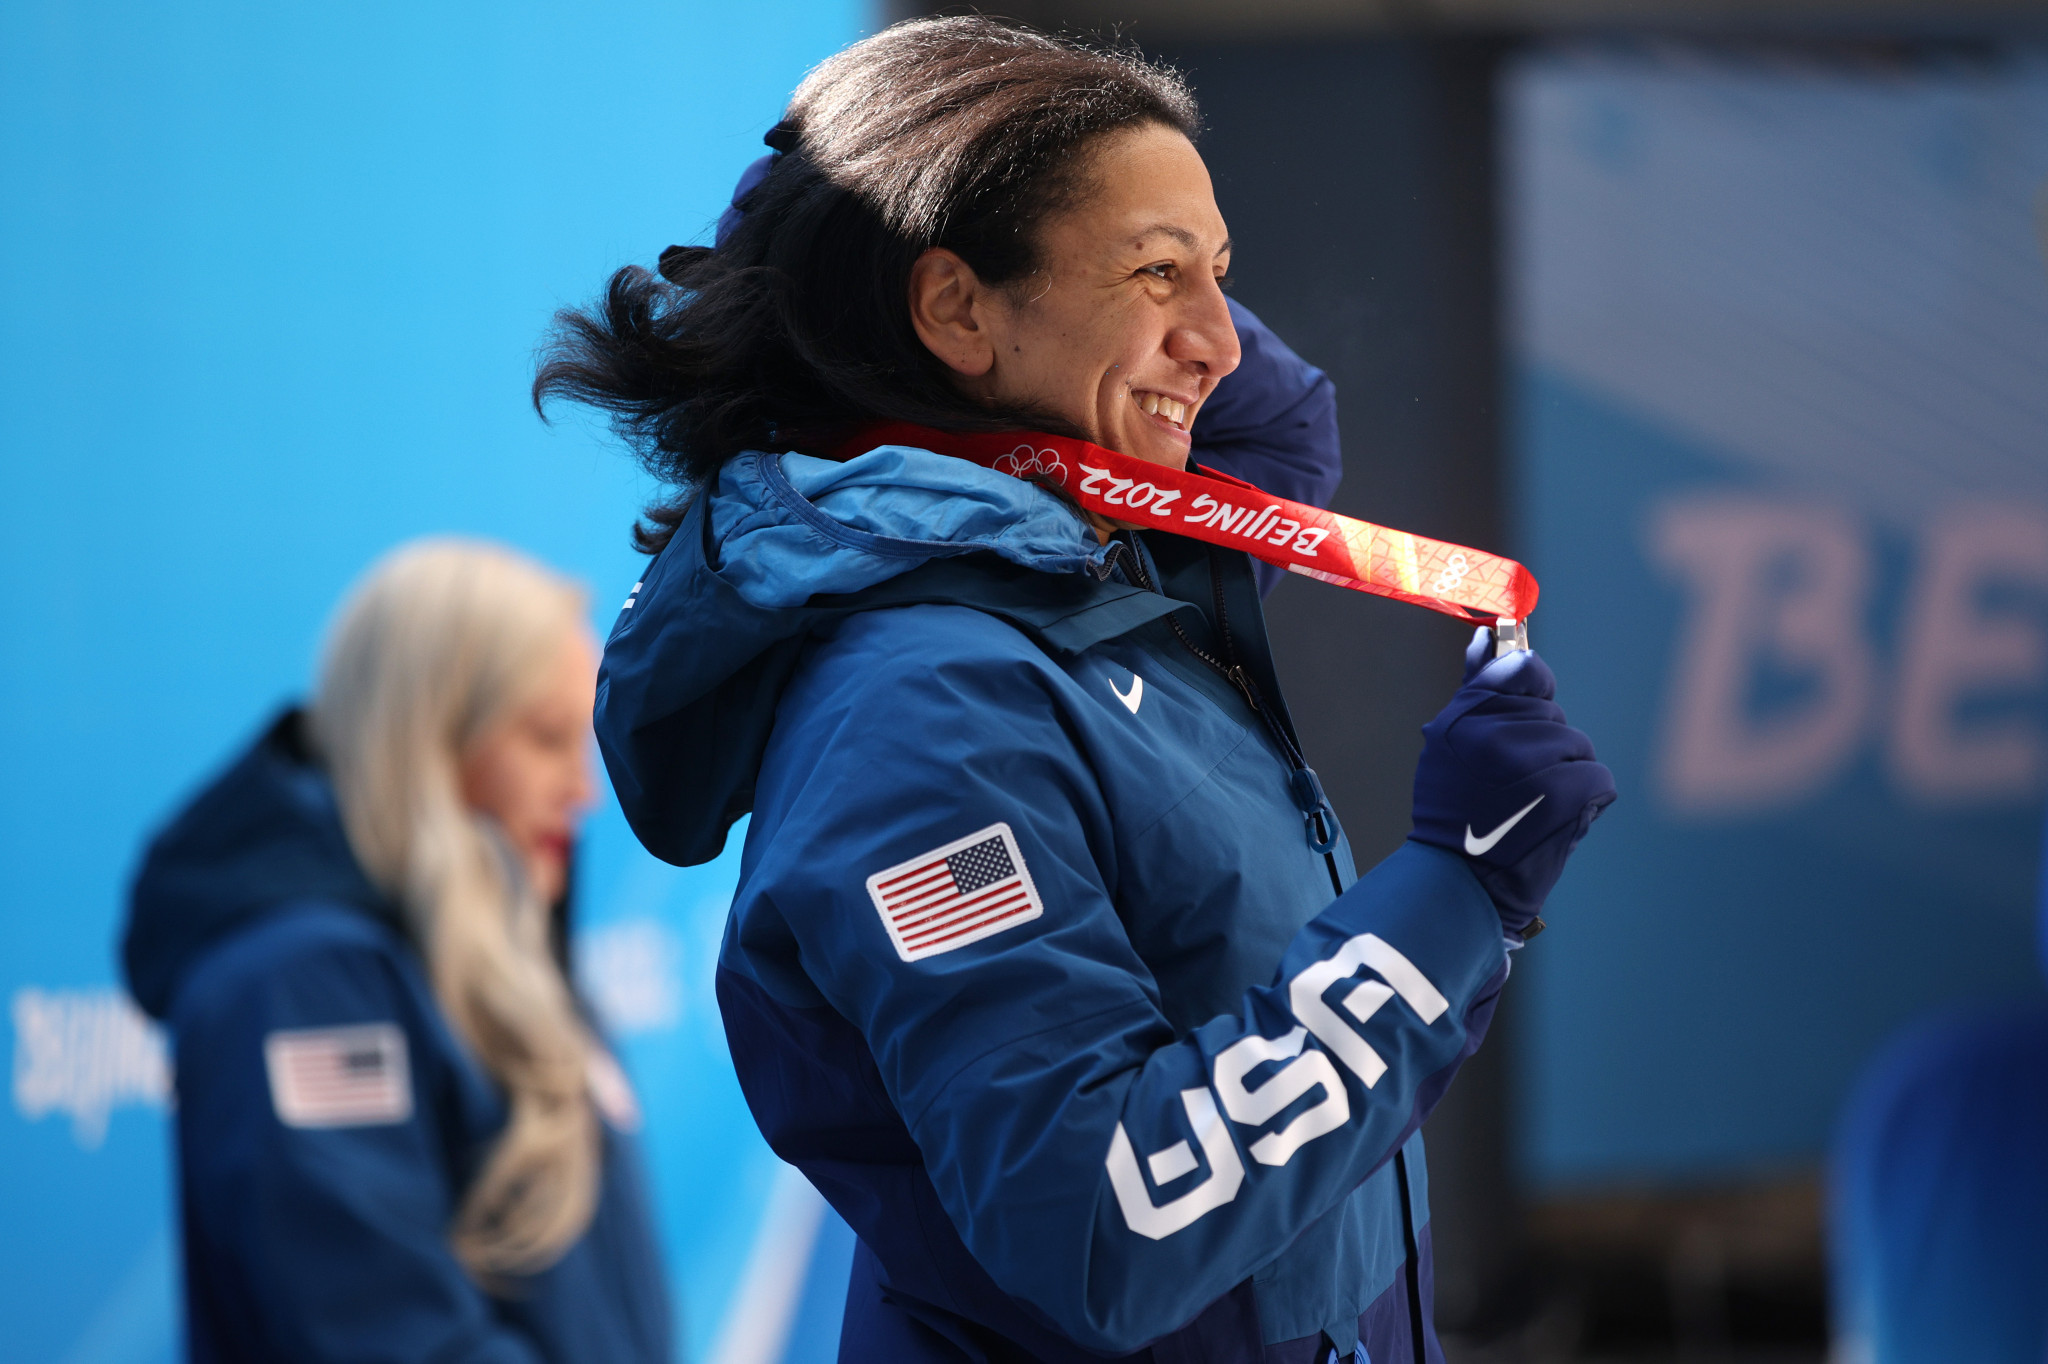 Monobob silver medallist Elana Meyers Taylor has been chosen to carry the United States flag in the Closing Ceremony of Beijing 2022 ©Getty Images